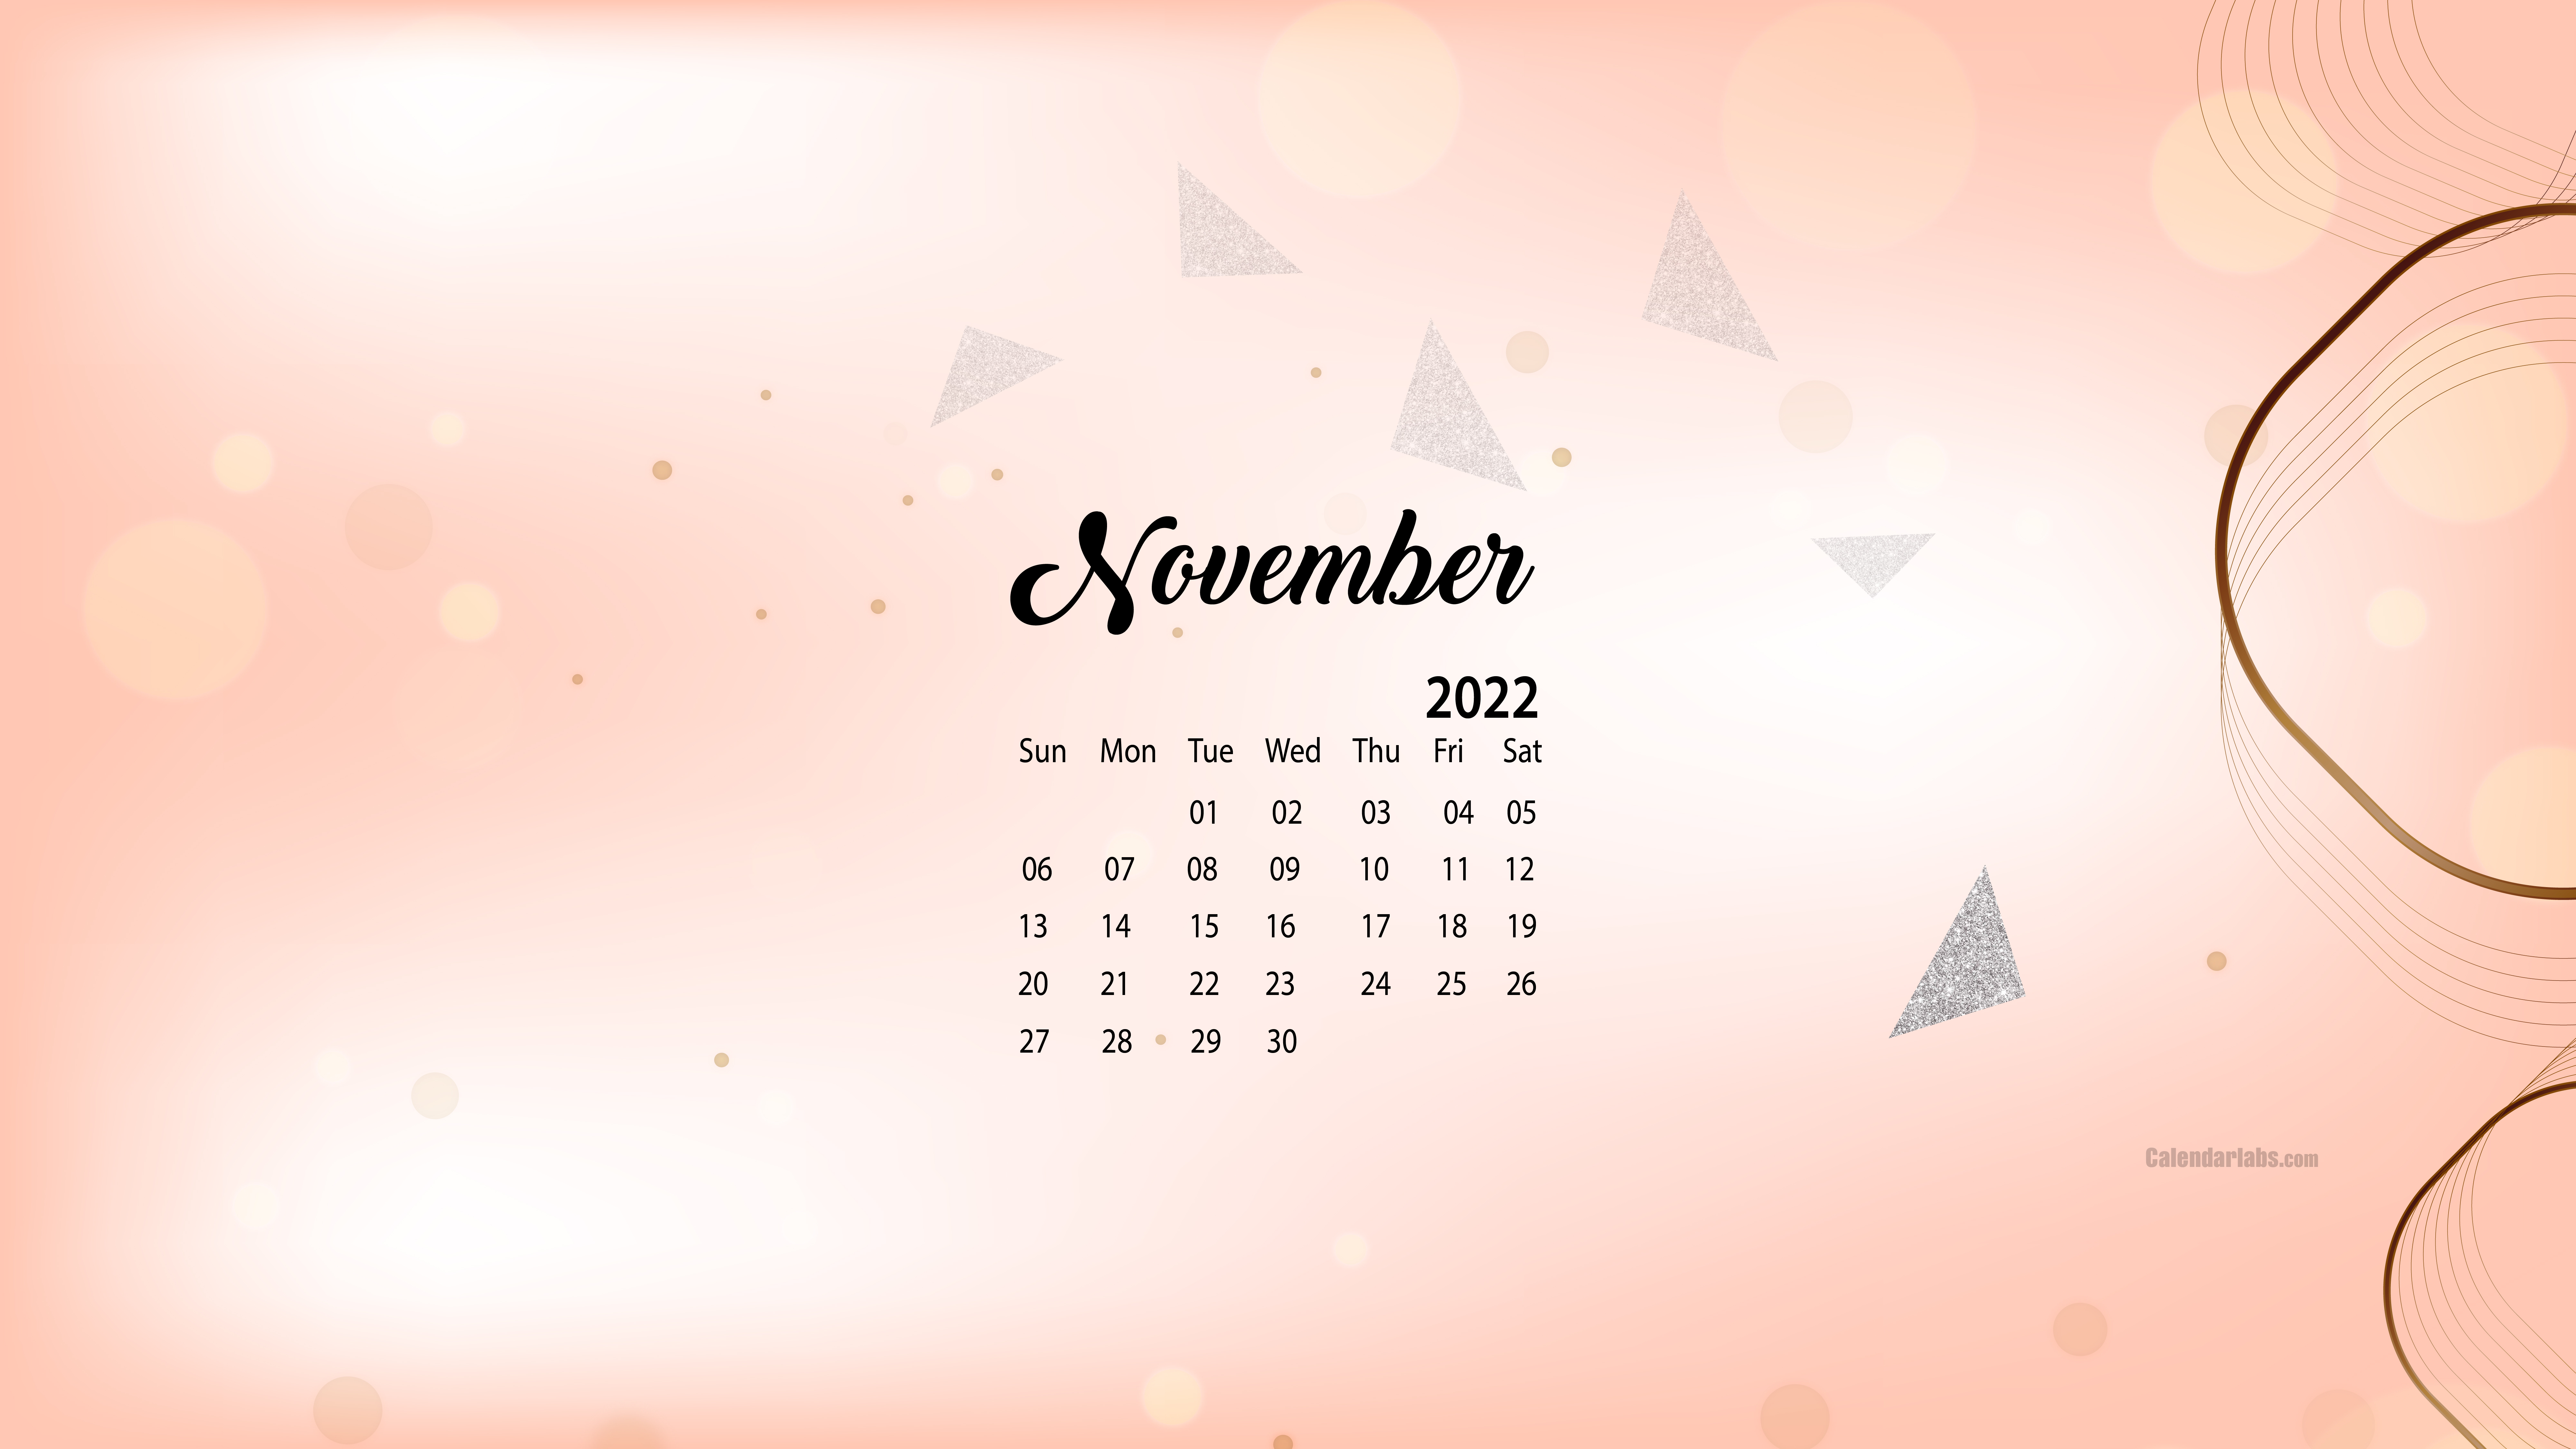 November 2021 Phone Wallpaper Calendar Design With Plaid Background  Template Download on Pngtree